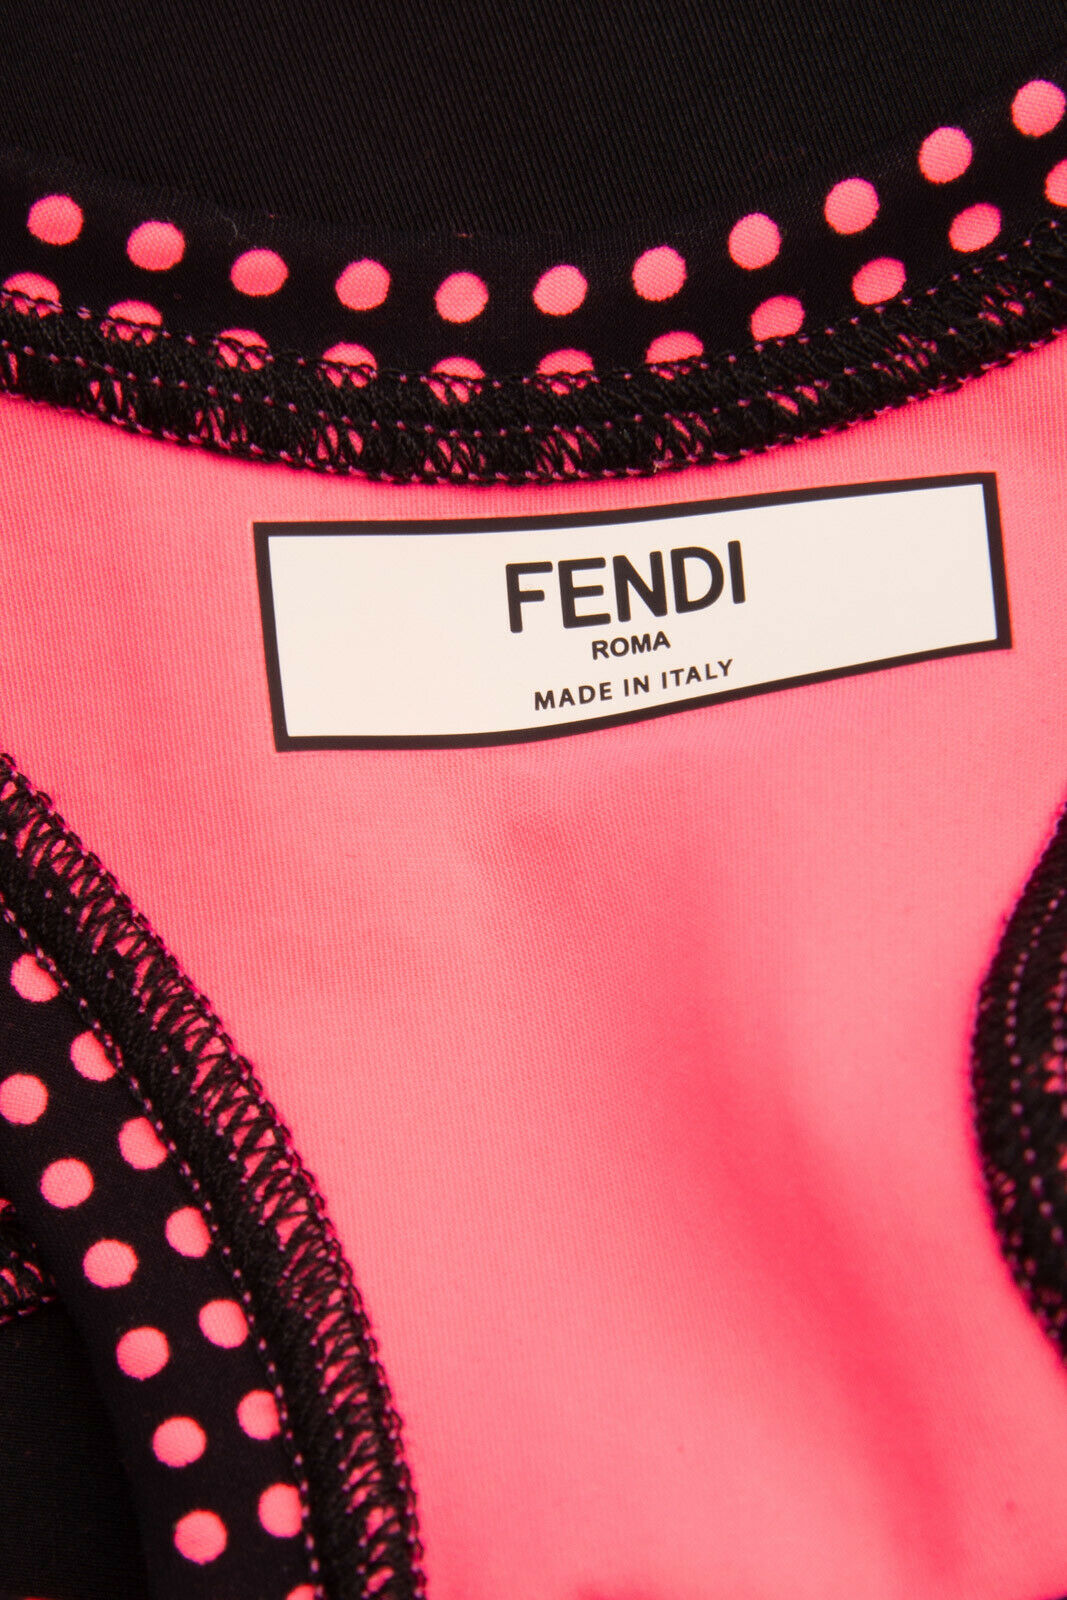 FENDI ROMA Top Size XS Made in Italy